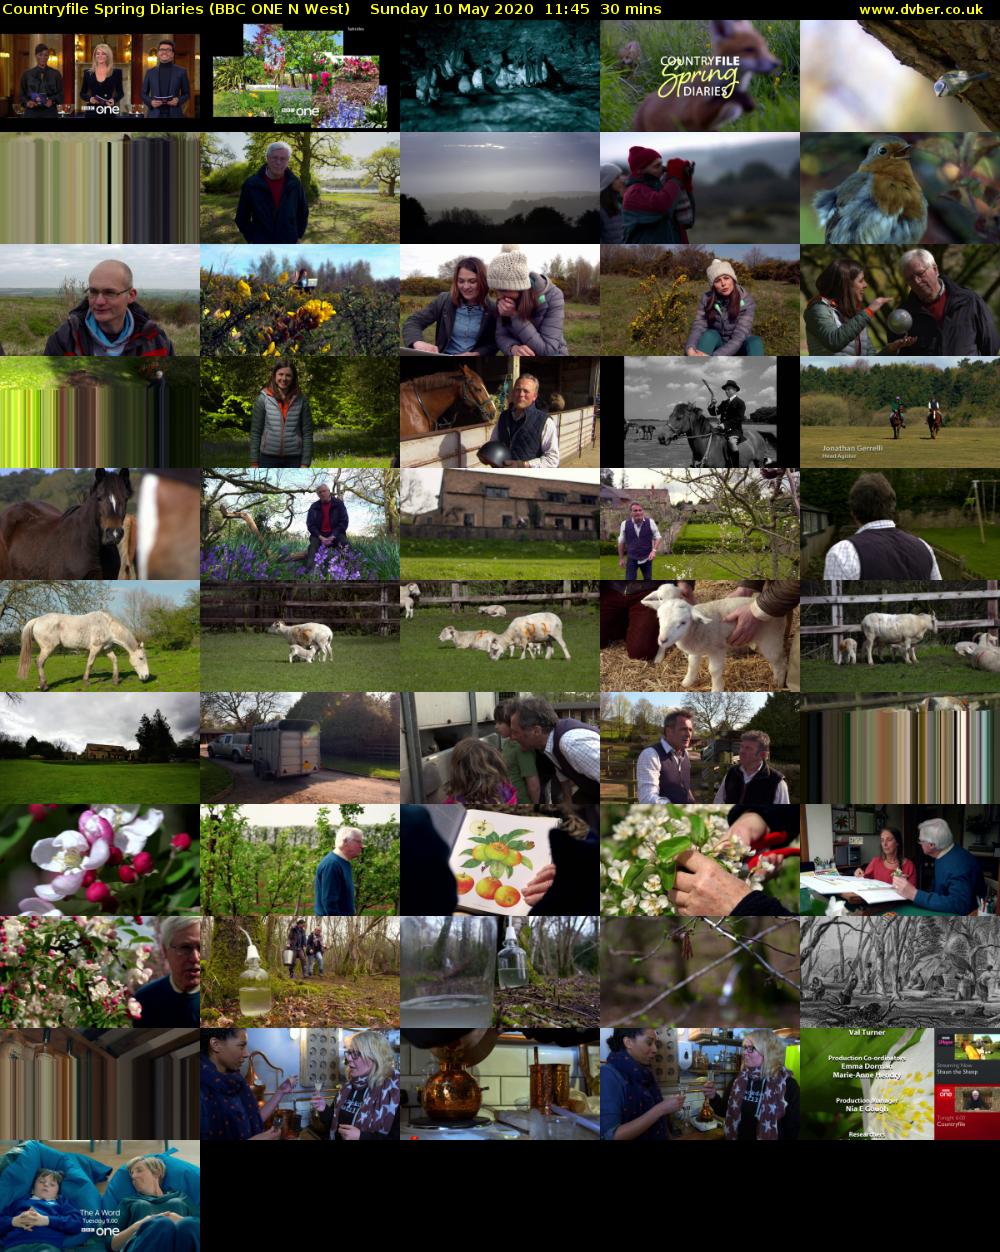 Countryfile Spring Diaries (BBC ONE N West) Sunday 10 May 2020 11:45 - 12:15